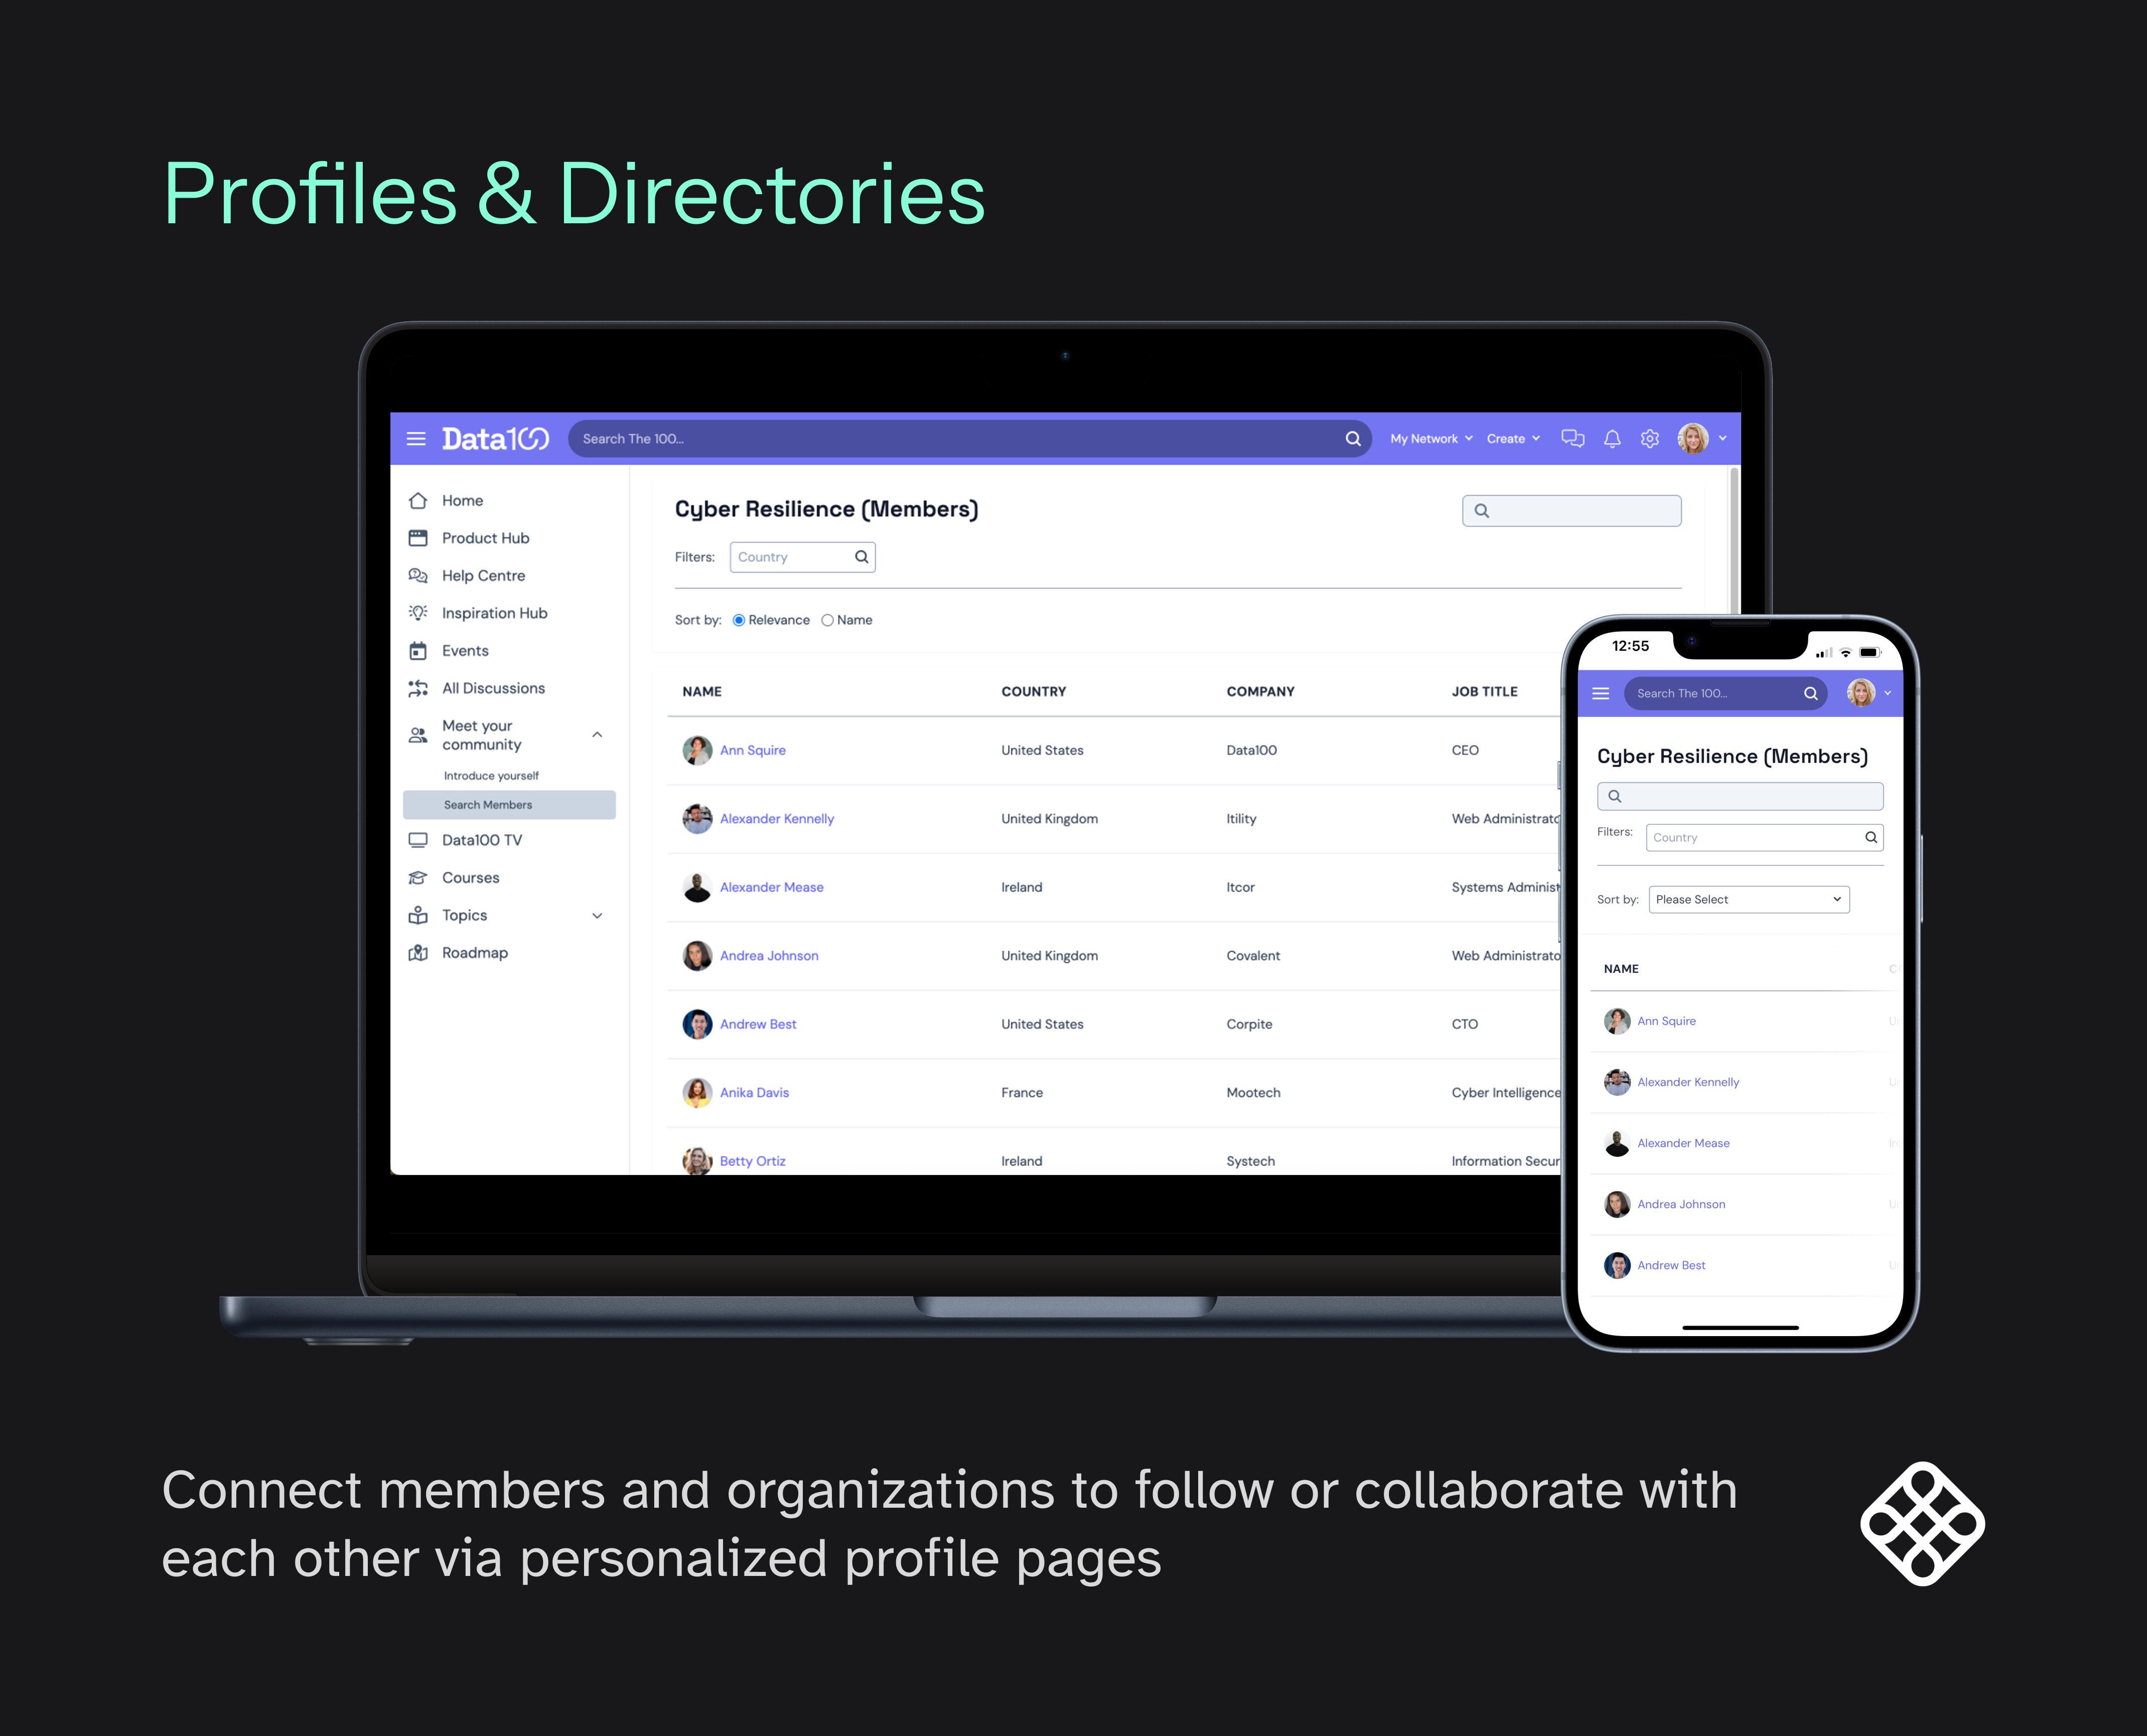 Connect members and organizations to follow or collaborate with each other via personalized profile pages